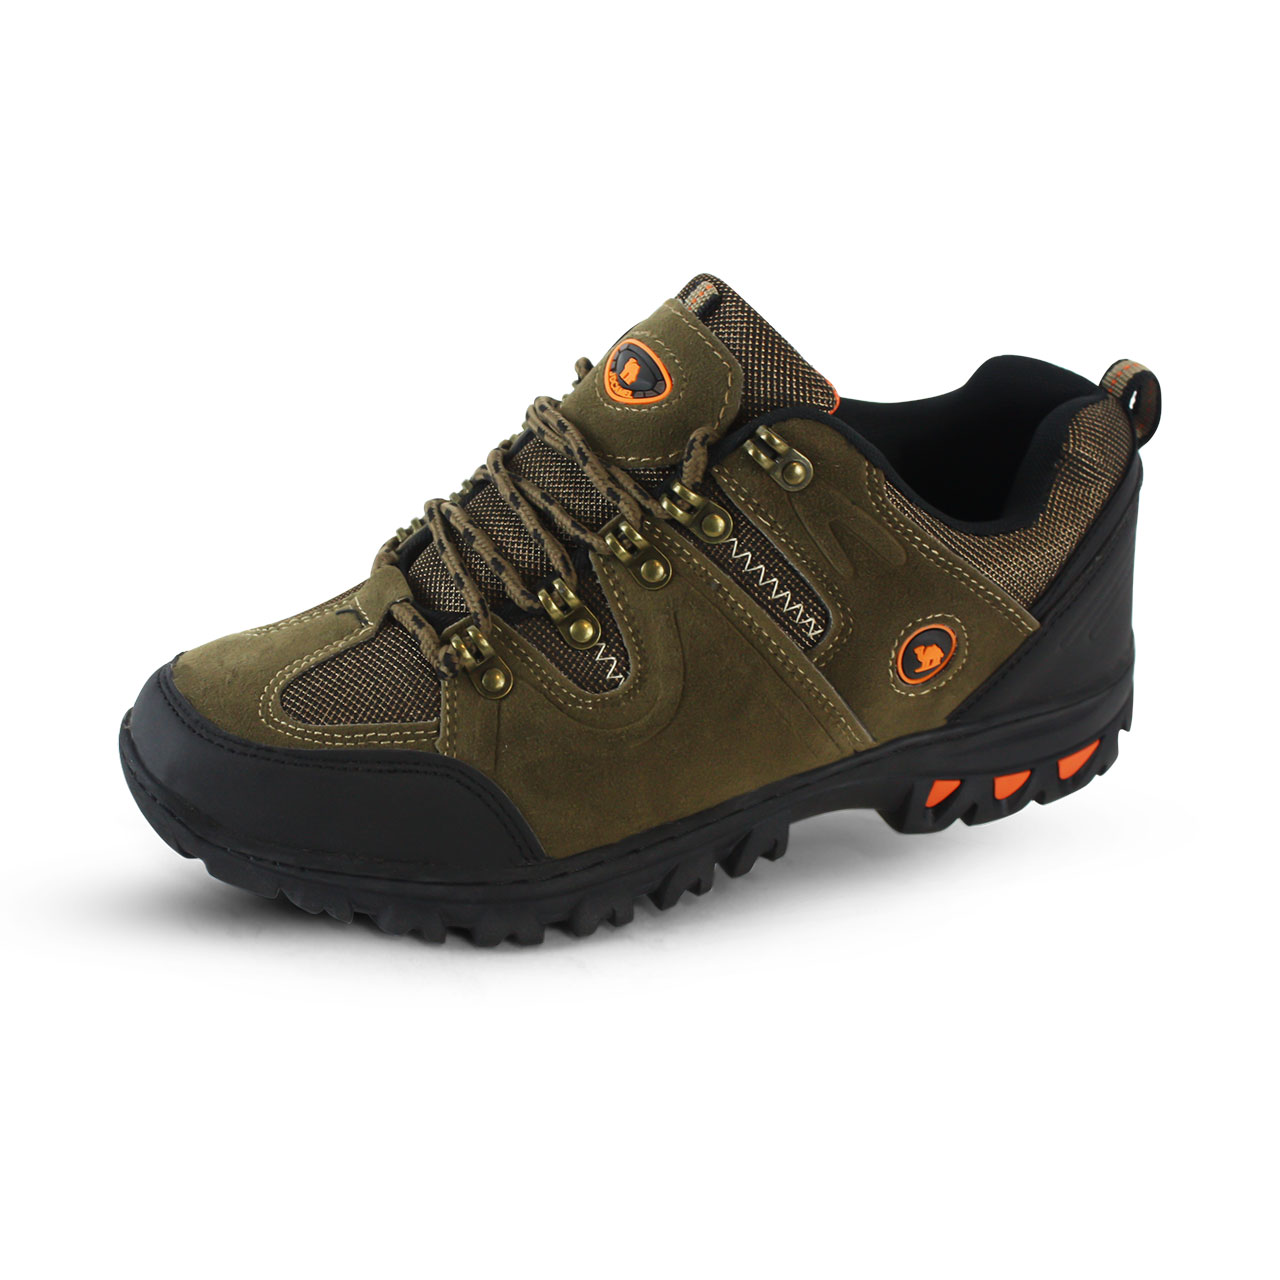 Men's Brown Athletic Outdoor Sports Shoes